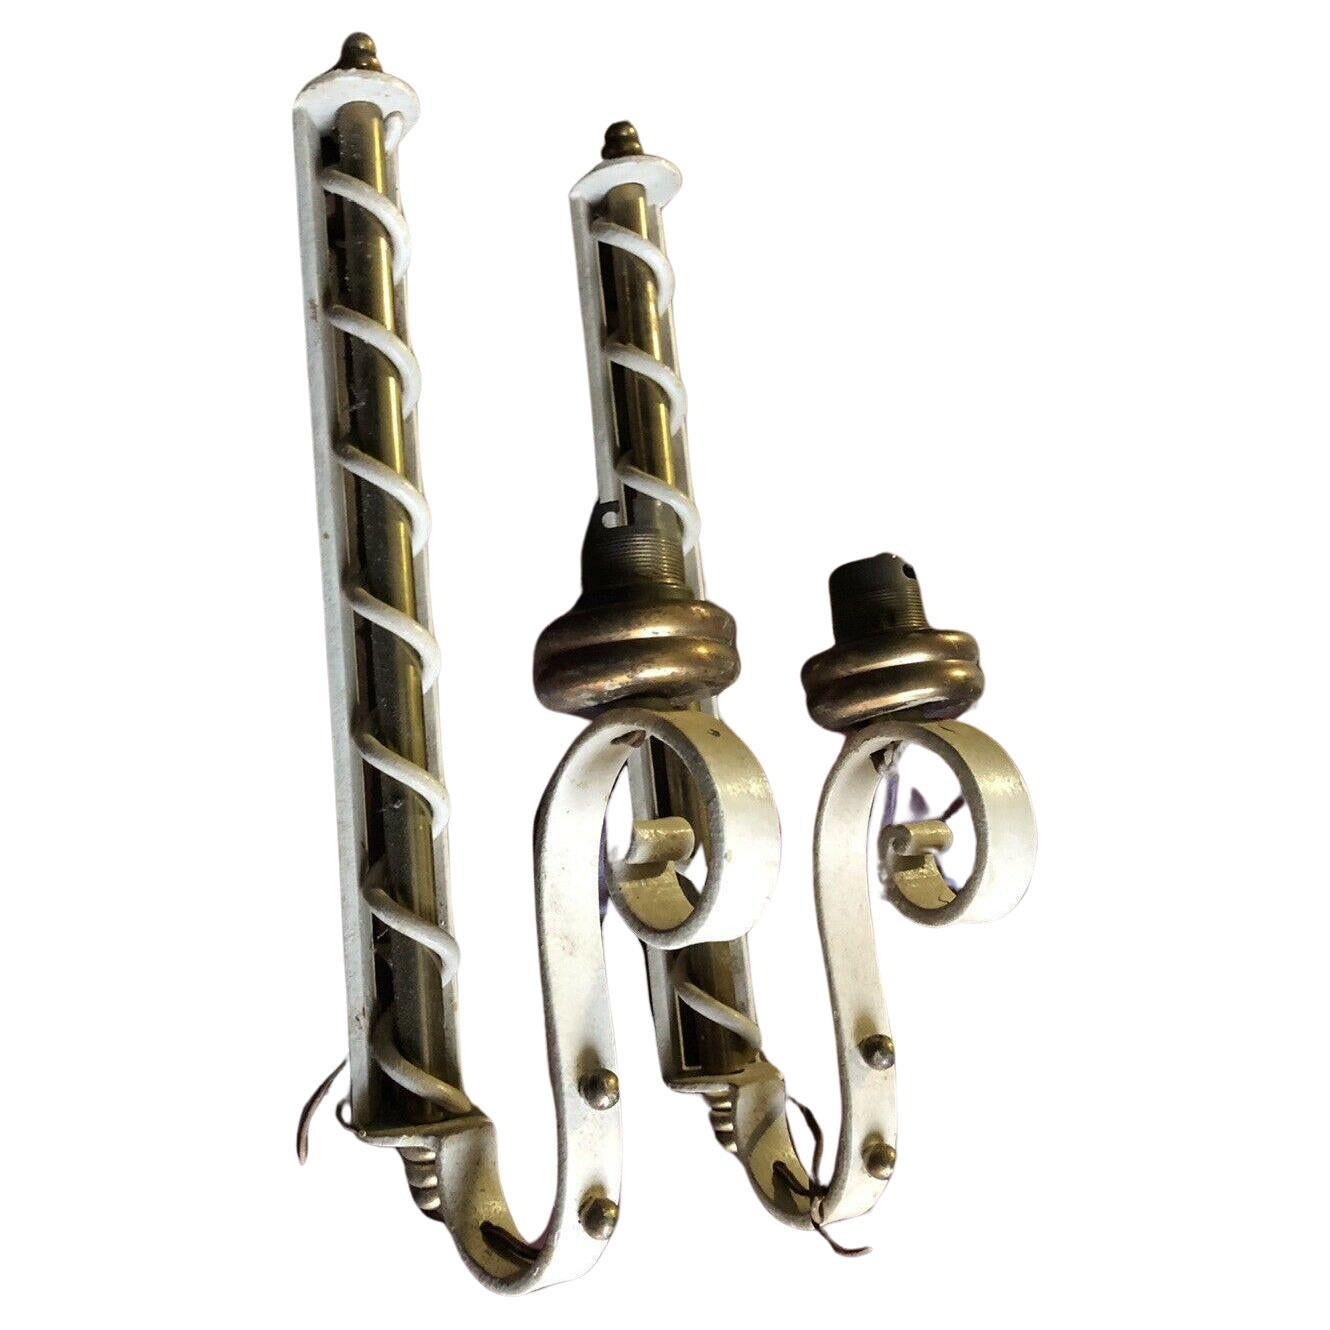 Pair c1925 French Art Deco Patinated & Gilt Iron Wall Sconces att Raymond Subes For Sale